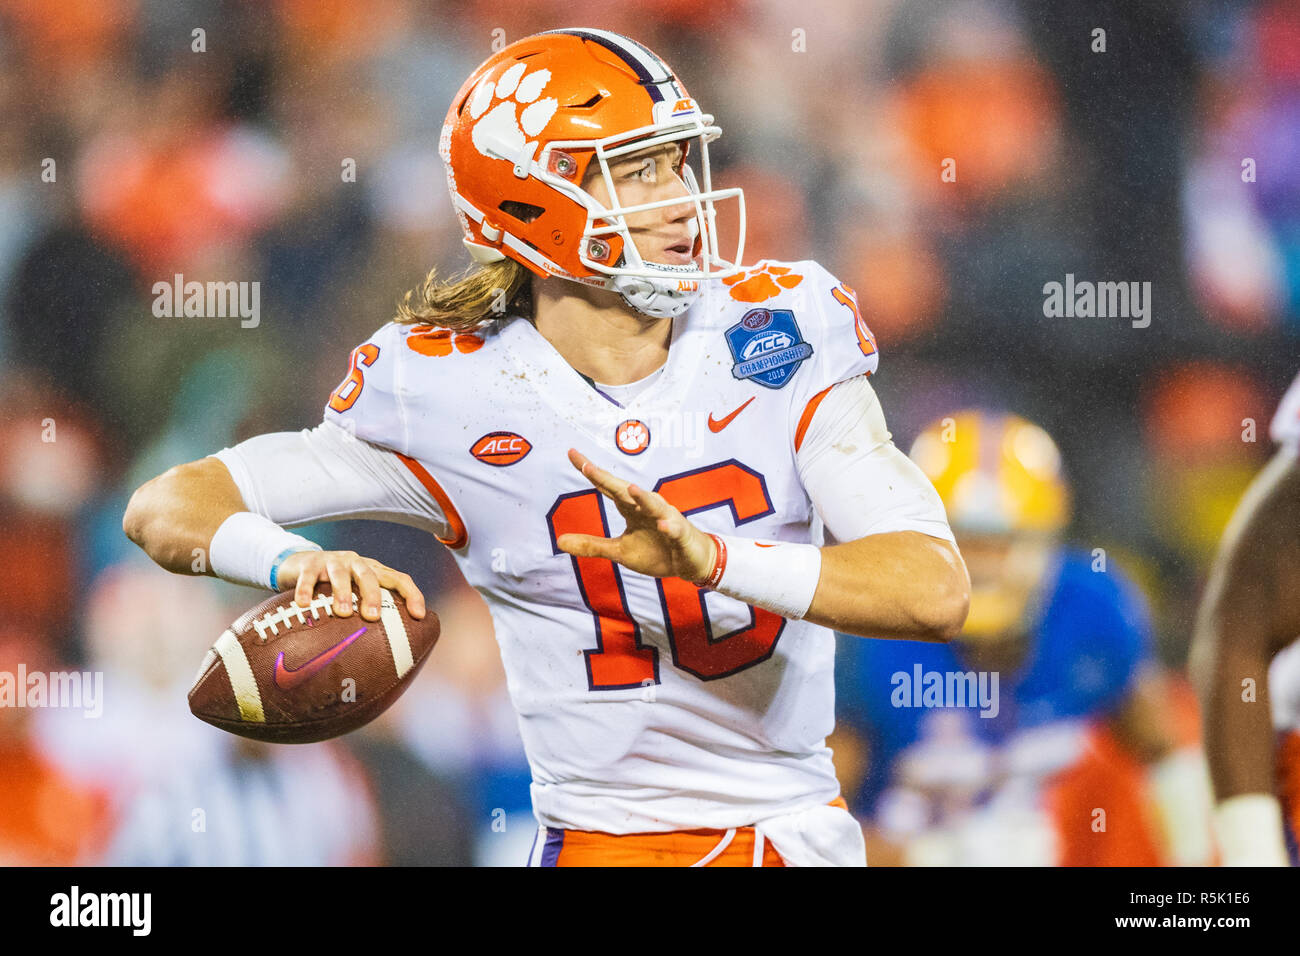 Clemson Tigers quarterback Trevor Lawrence (16) during the ACC College Football Championship game between Pitt and Clemson on Saturday December 1, 2018 at Bank of America Stadium in Charlotte, NC. Jacob Kupferman/CSM Stock Photo